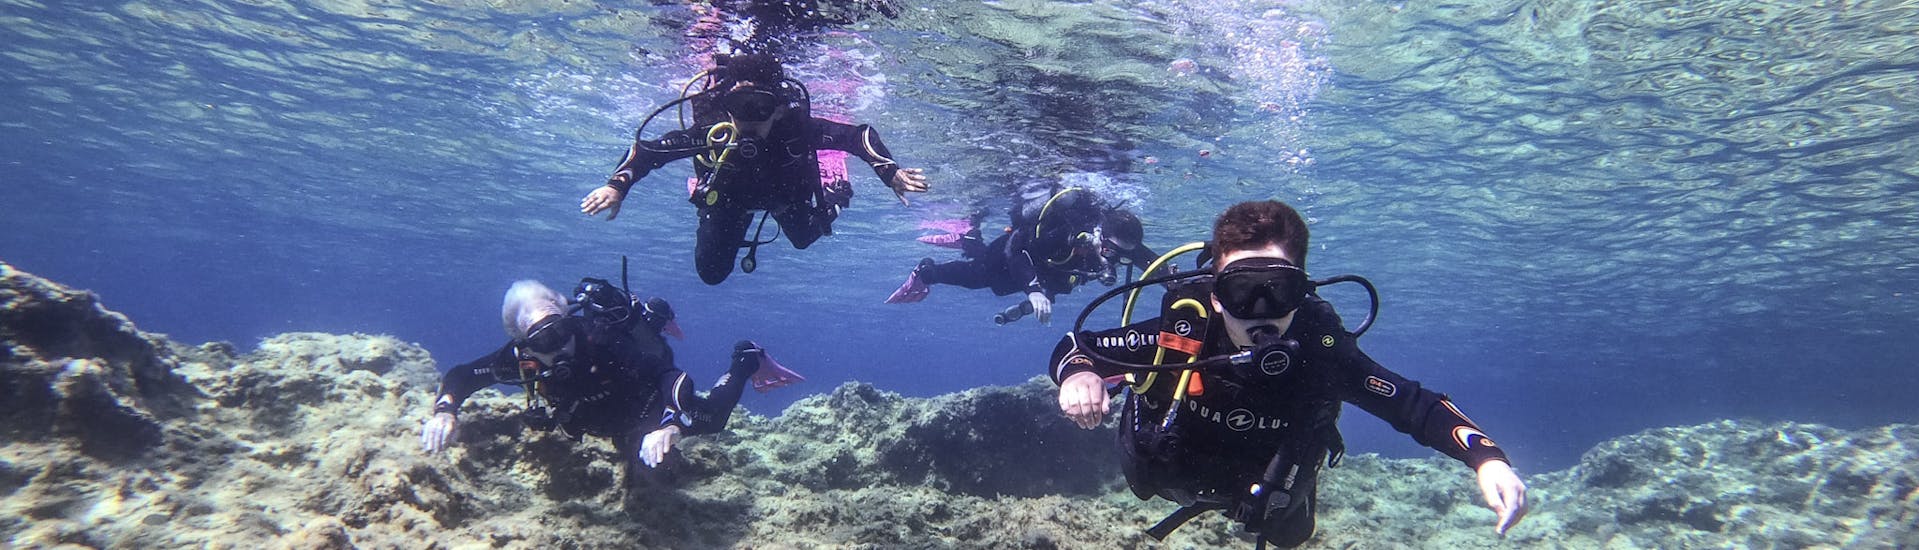 4 people diving during the PADI Discover Scuba Diving Experience in St. Paul's Bay of ABC Diving Malta.